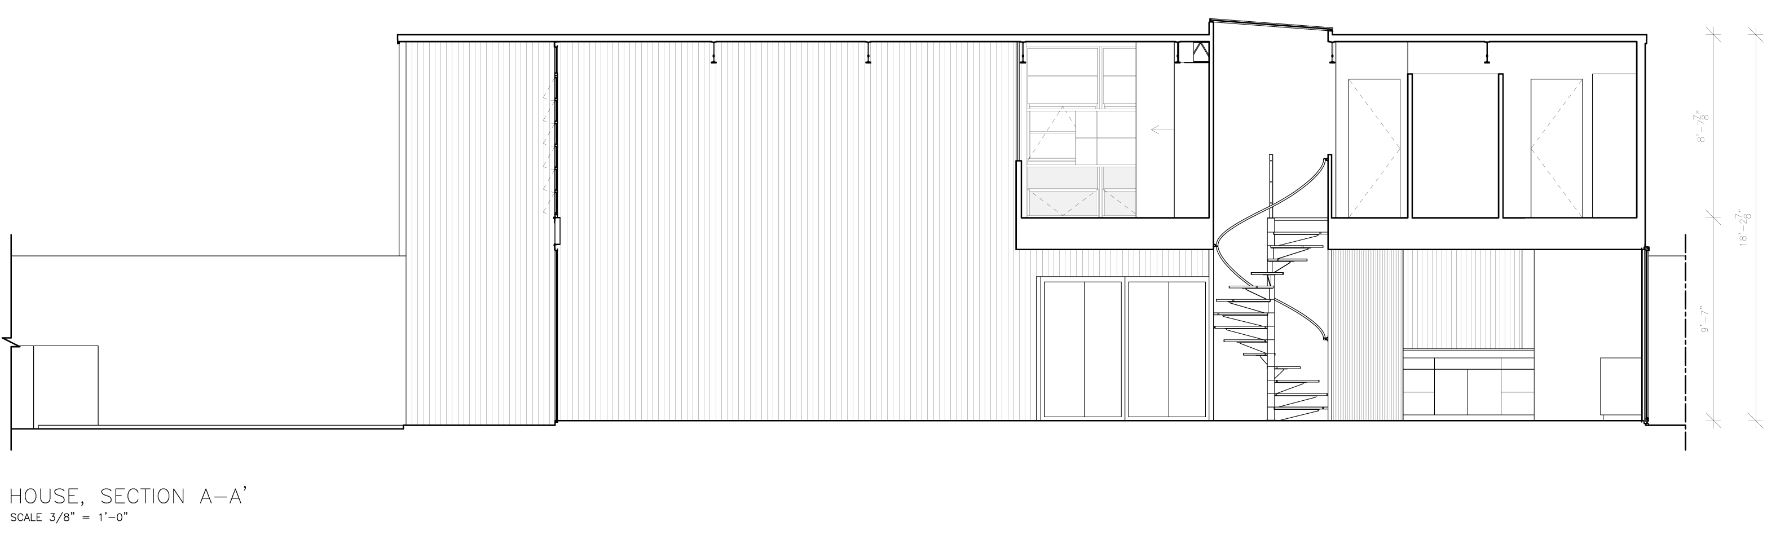 This image shows Eames house, House, Section A-A' provided by Eames House as-built drawing, public domain